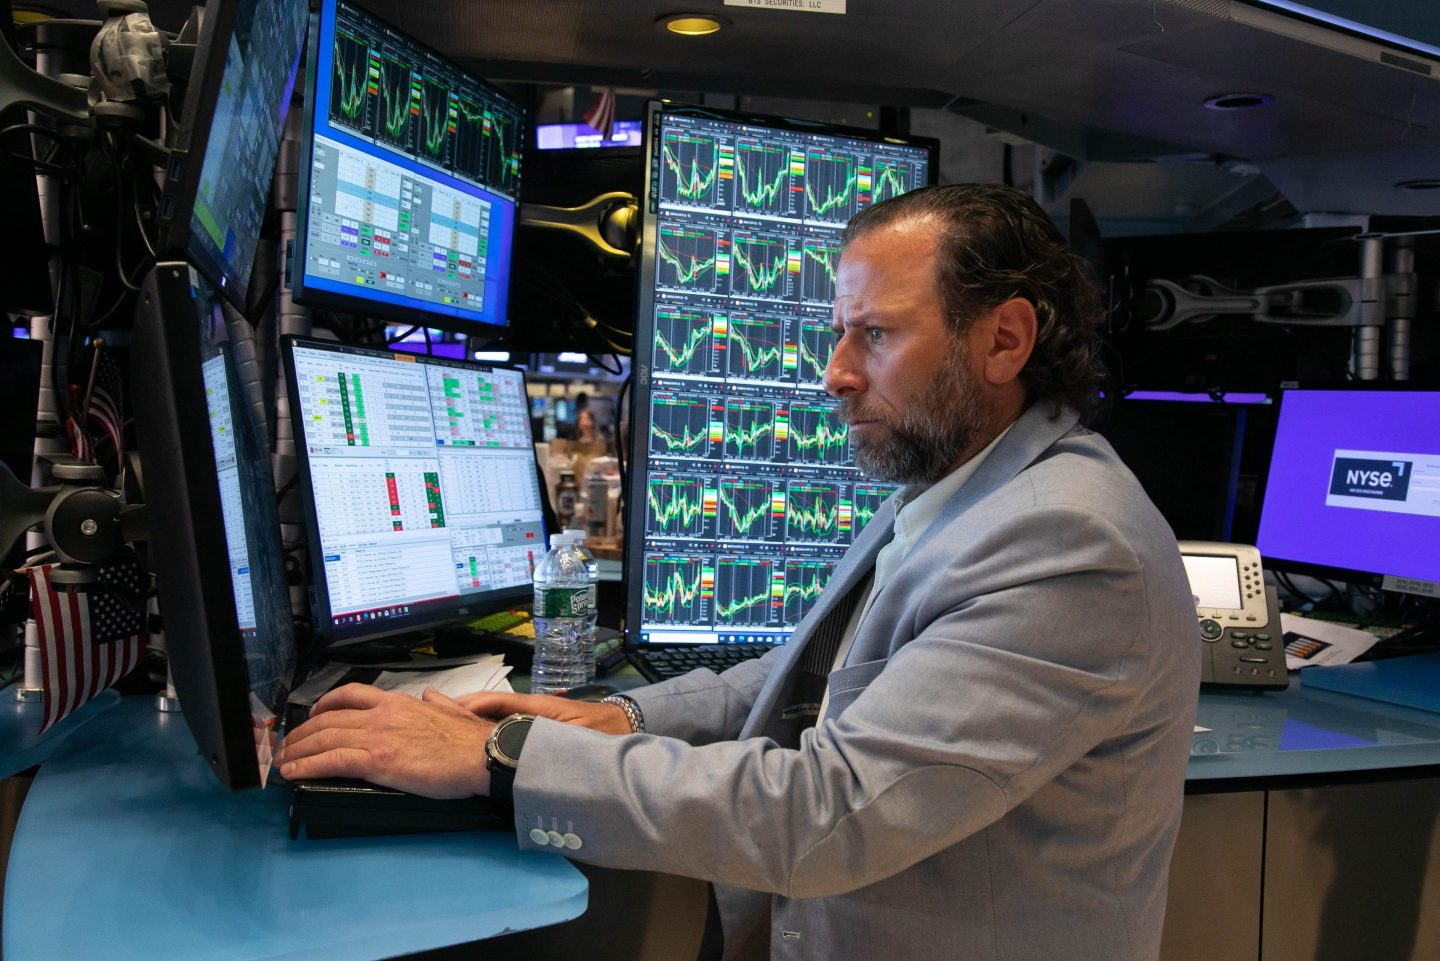 A trader works on the floor of the New York Stock Exchange in New York, the United States, on May 3, 2024. U.S. stocks ended higher on Friday. The Dow Jones Industrial Average rose 450.02 points, or 1.18 percent, to 38,675.68. The S&amp;P 500 added 63.59 points, or 1.26 percent, to 5,127.79. The Nasdaq Composite Index increased by 315.37 points, or 1.99 percent, to 16,156.33. (Photo by Michael Nagle/Xinhua via Getty Images)